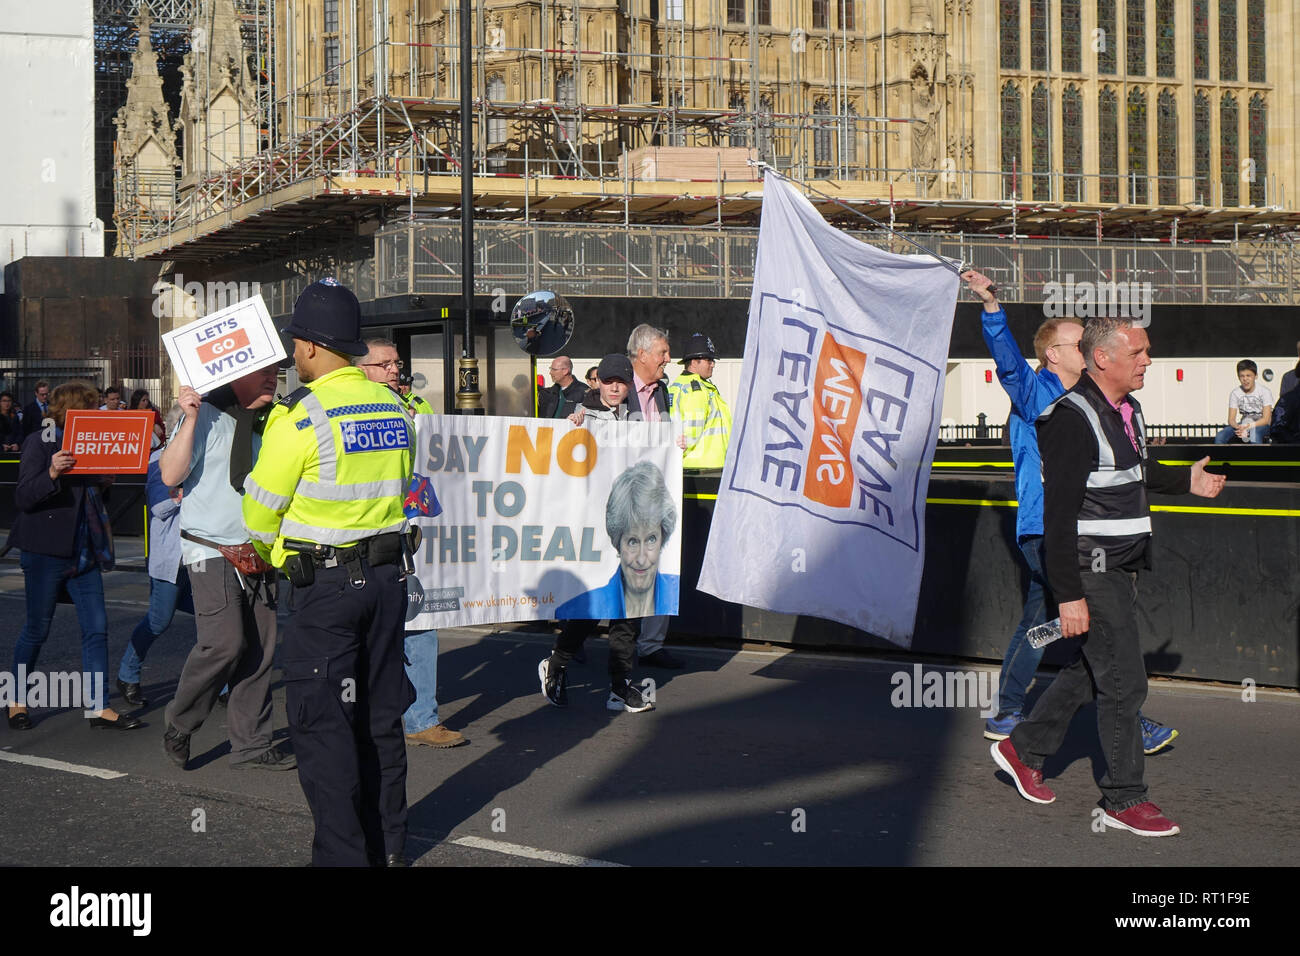 London, UK. 27th Feb, 2019. Pro-Brexit Activists demonstrate opposite Palace Of Westminster in London Credit: Thomas Krych/Alamy Live News Stock Photo